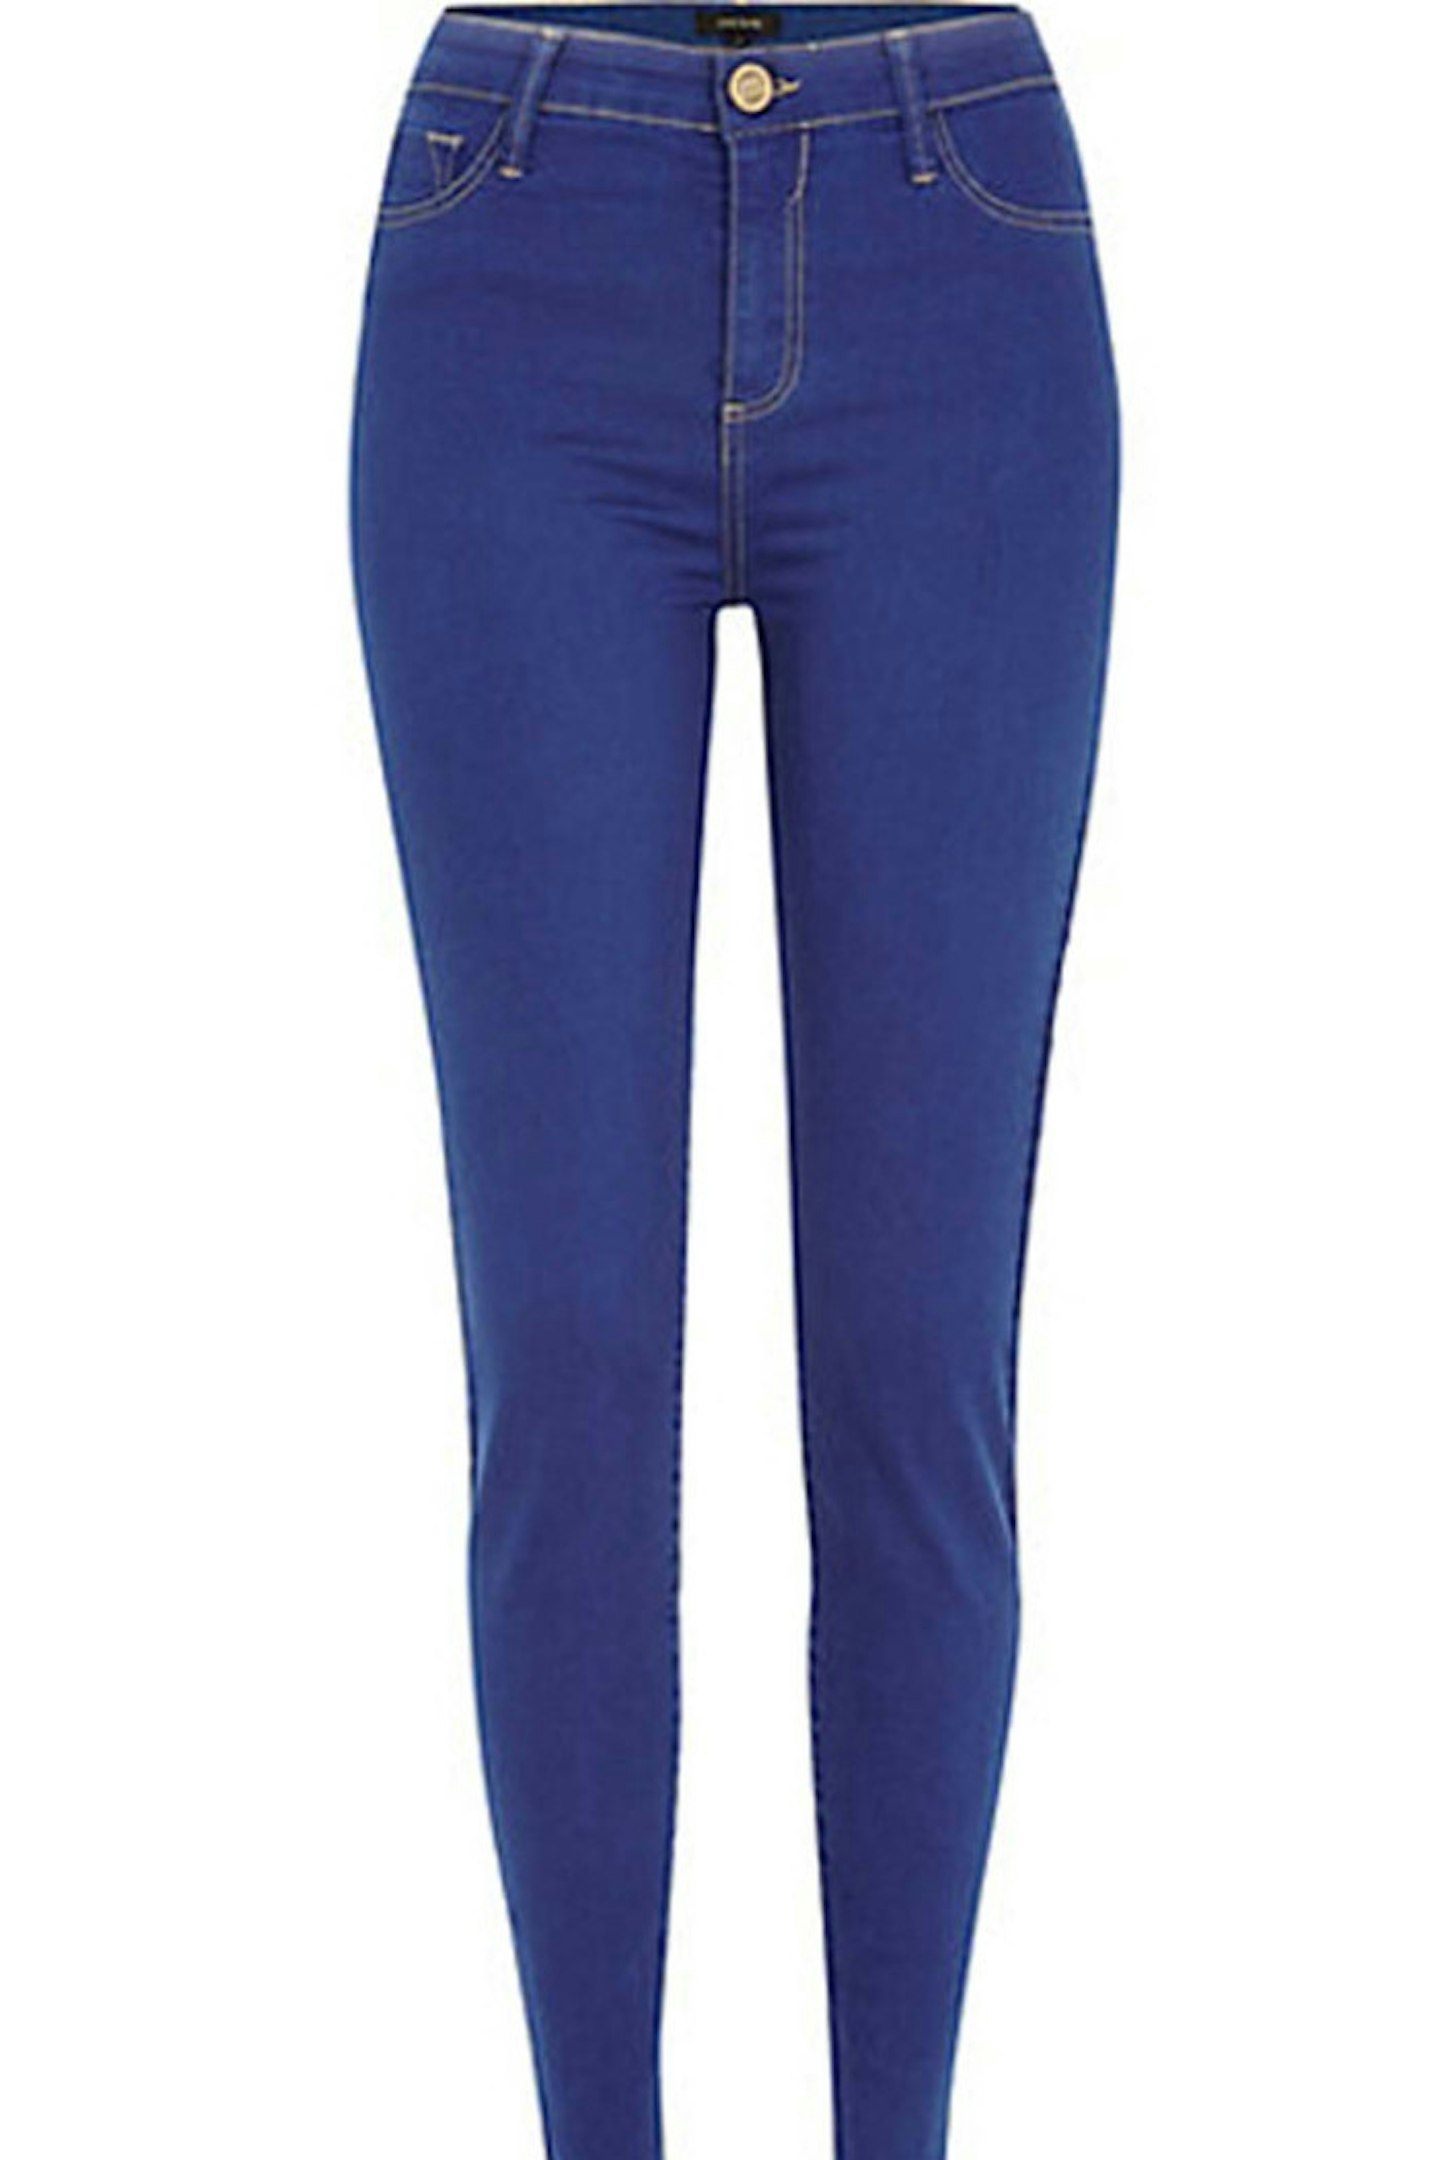 Jeans, £35, River Island